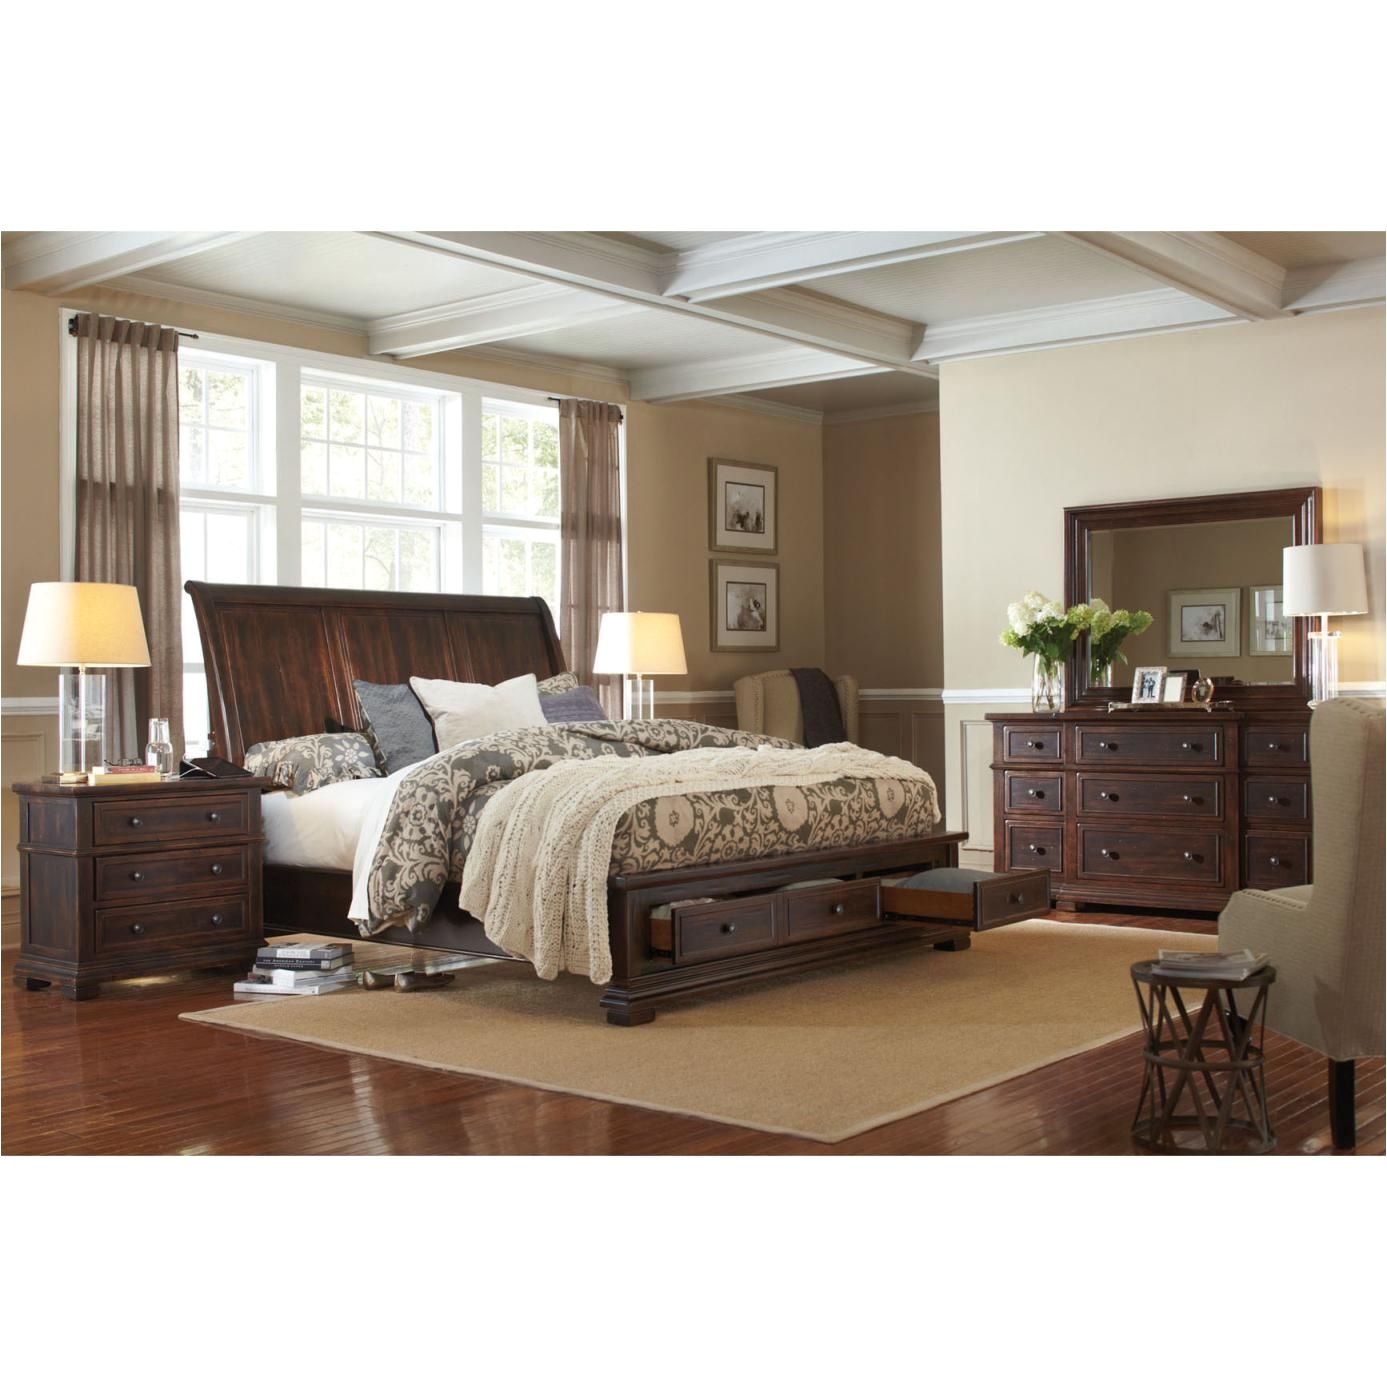 Bedroom Sets with Storage Beds aspenhome Westbrooke 4 Piece Sleigh Storage Bedroom Set with 2nd